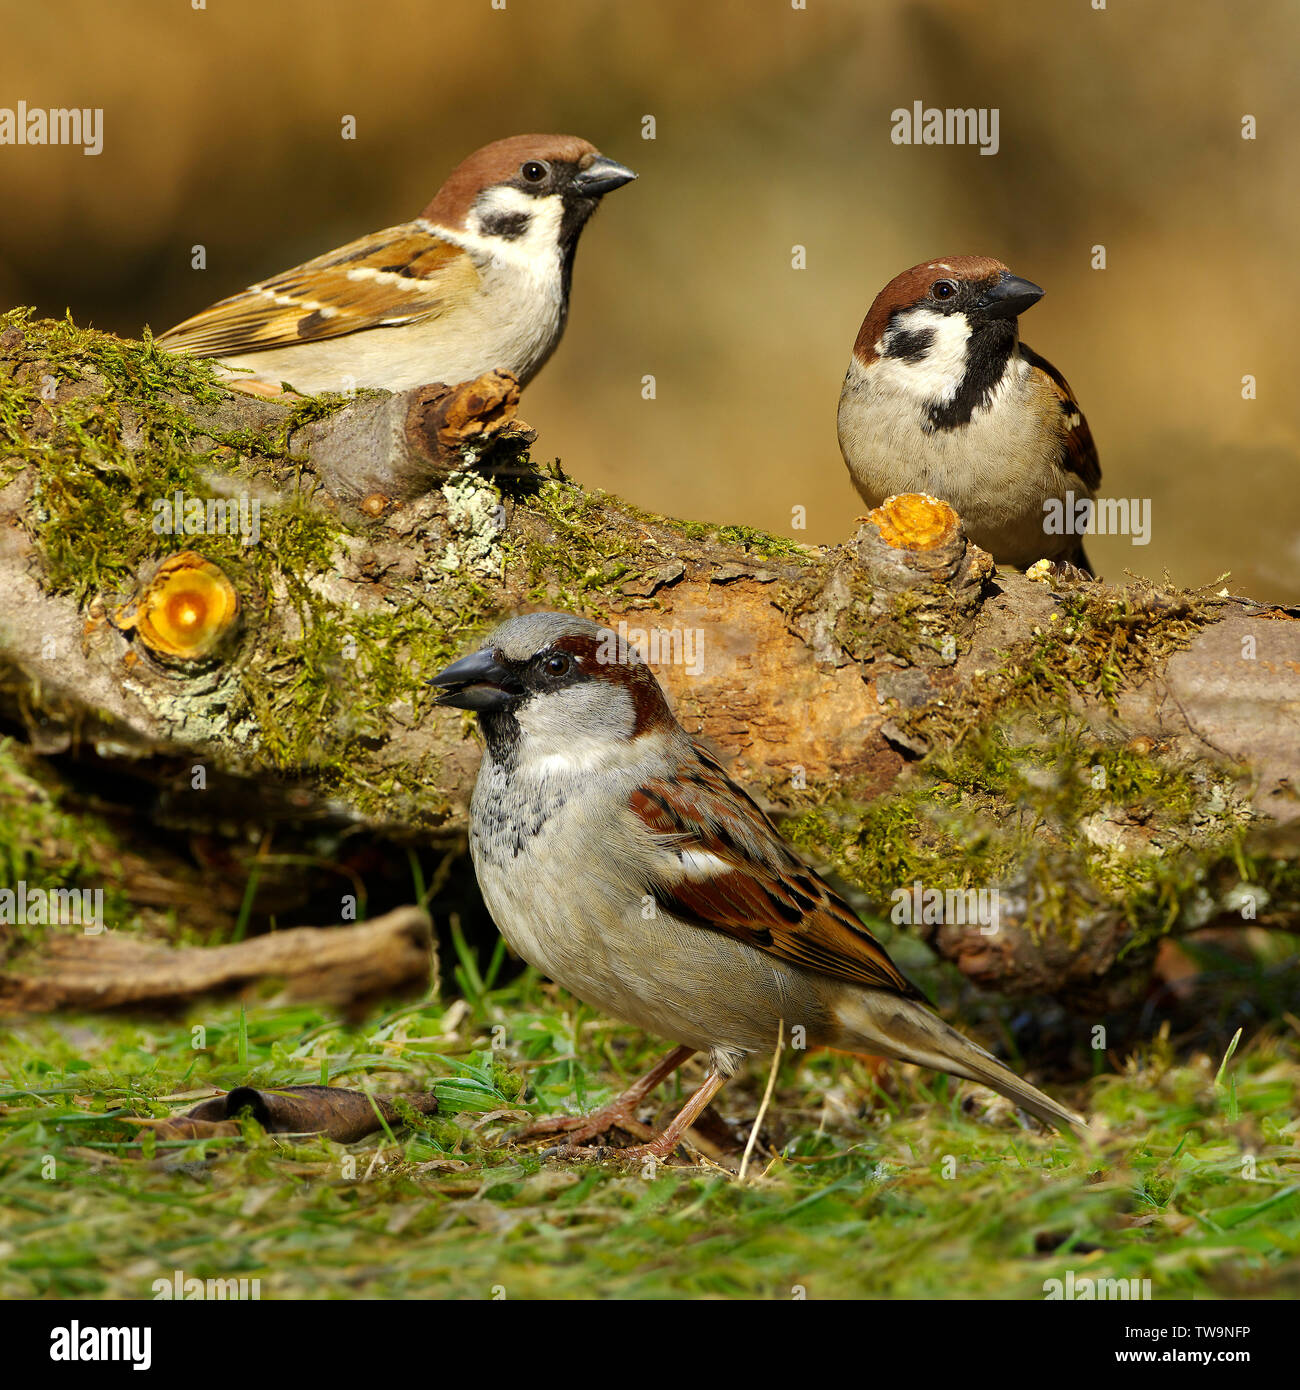 House Sparrow (Passer domesticus, in front) and two Tree Sparrows (Passer montanus, behind) on a mossy log. Germany Stock Photo